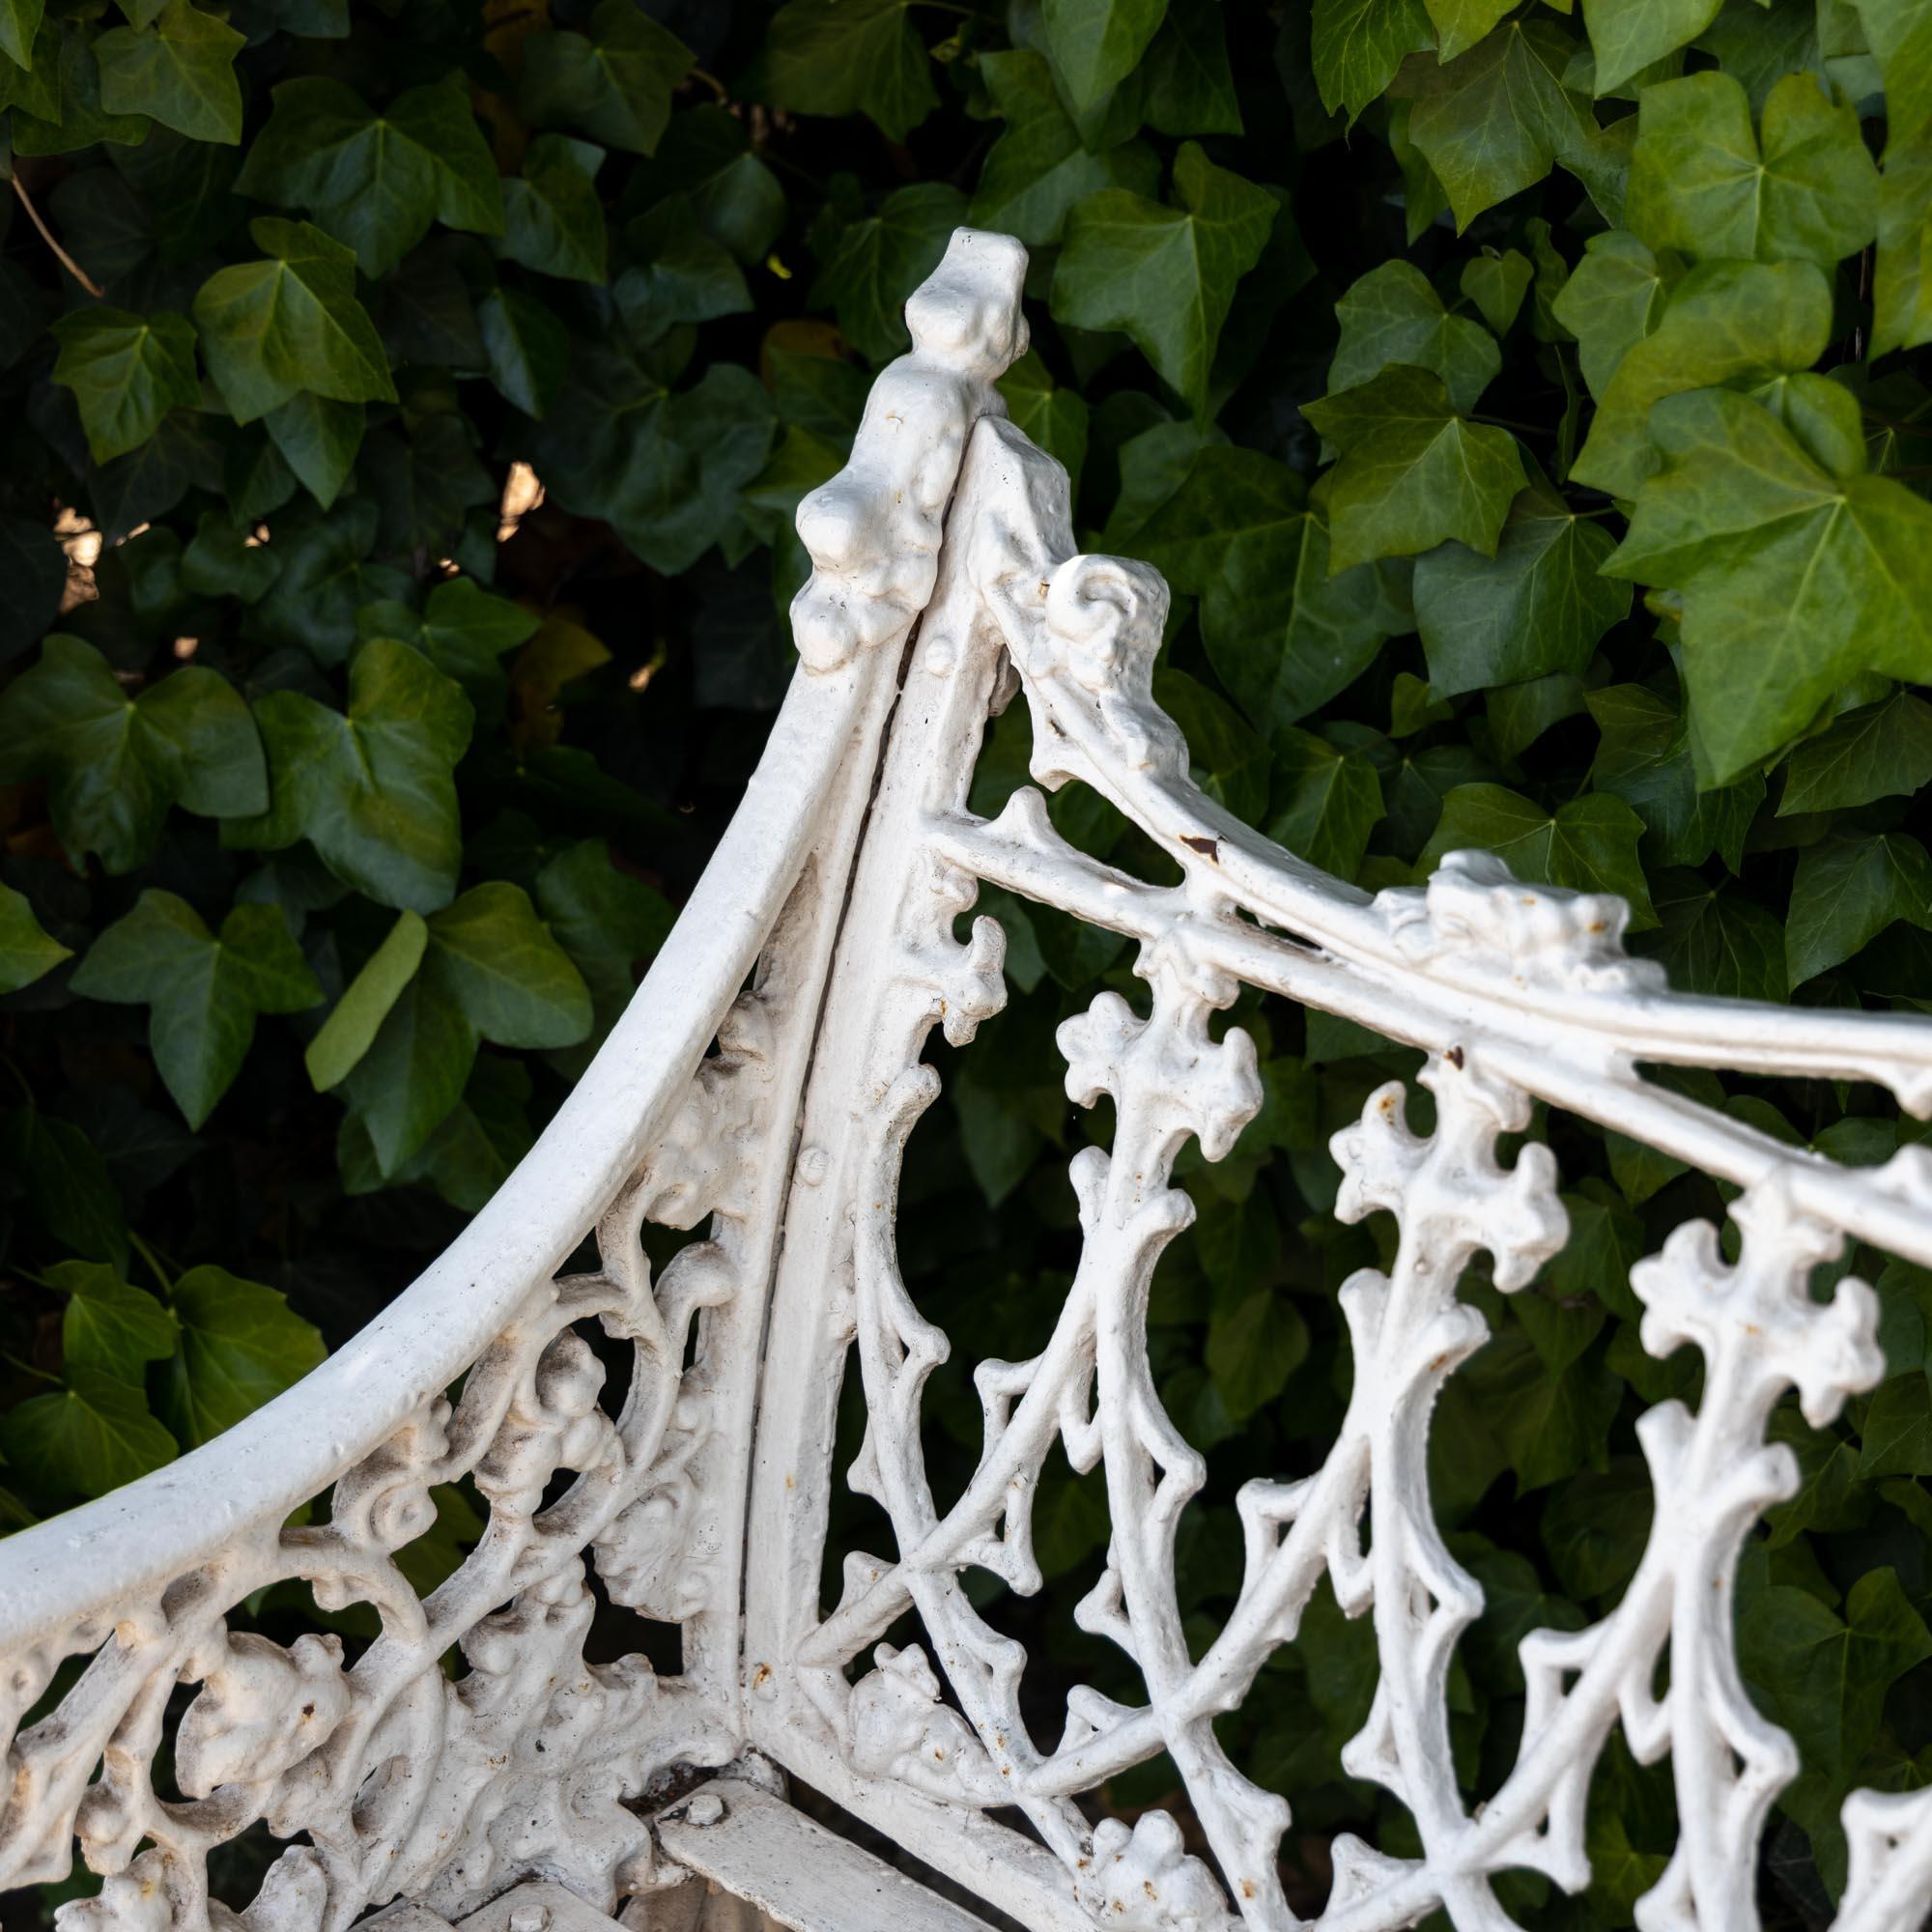 White lacquered cast iron garden bench in the neo-Gothic style of late 19th century Victorian garden furniture. The central medallion shows the Mexican heraldic eagle circumscribed by 